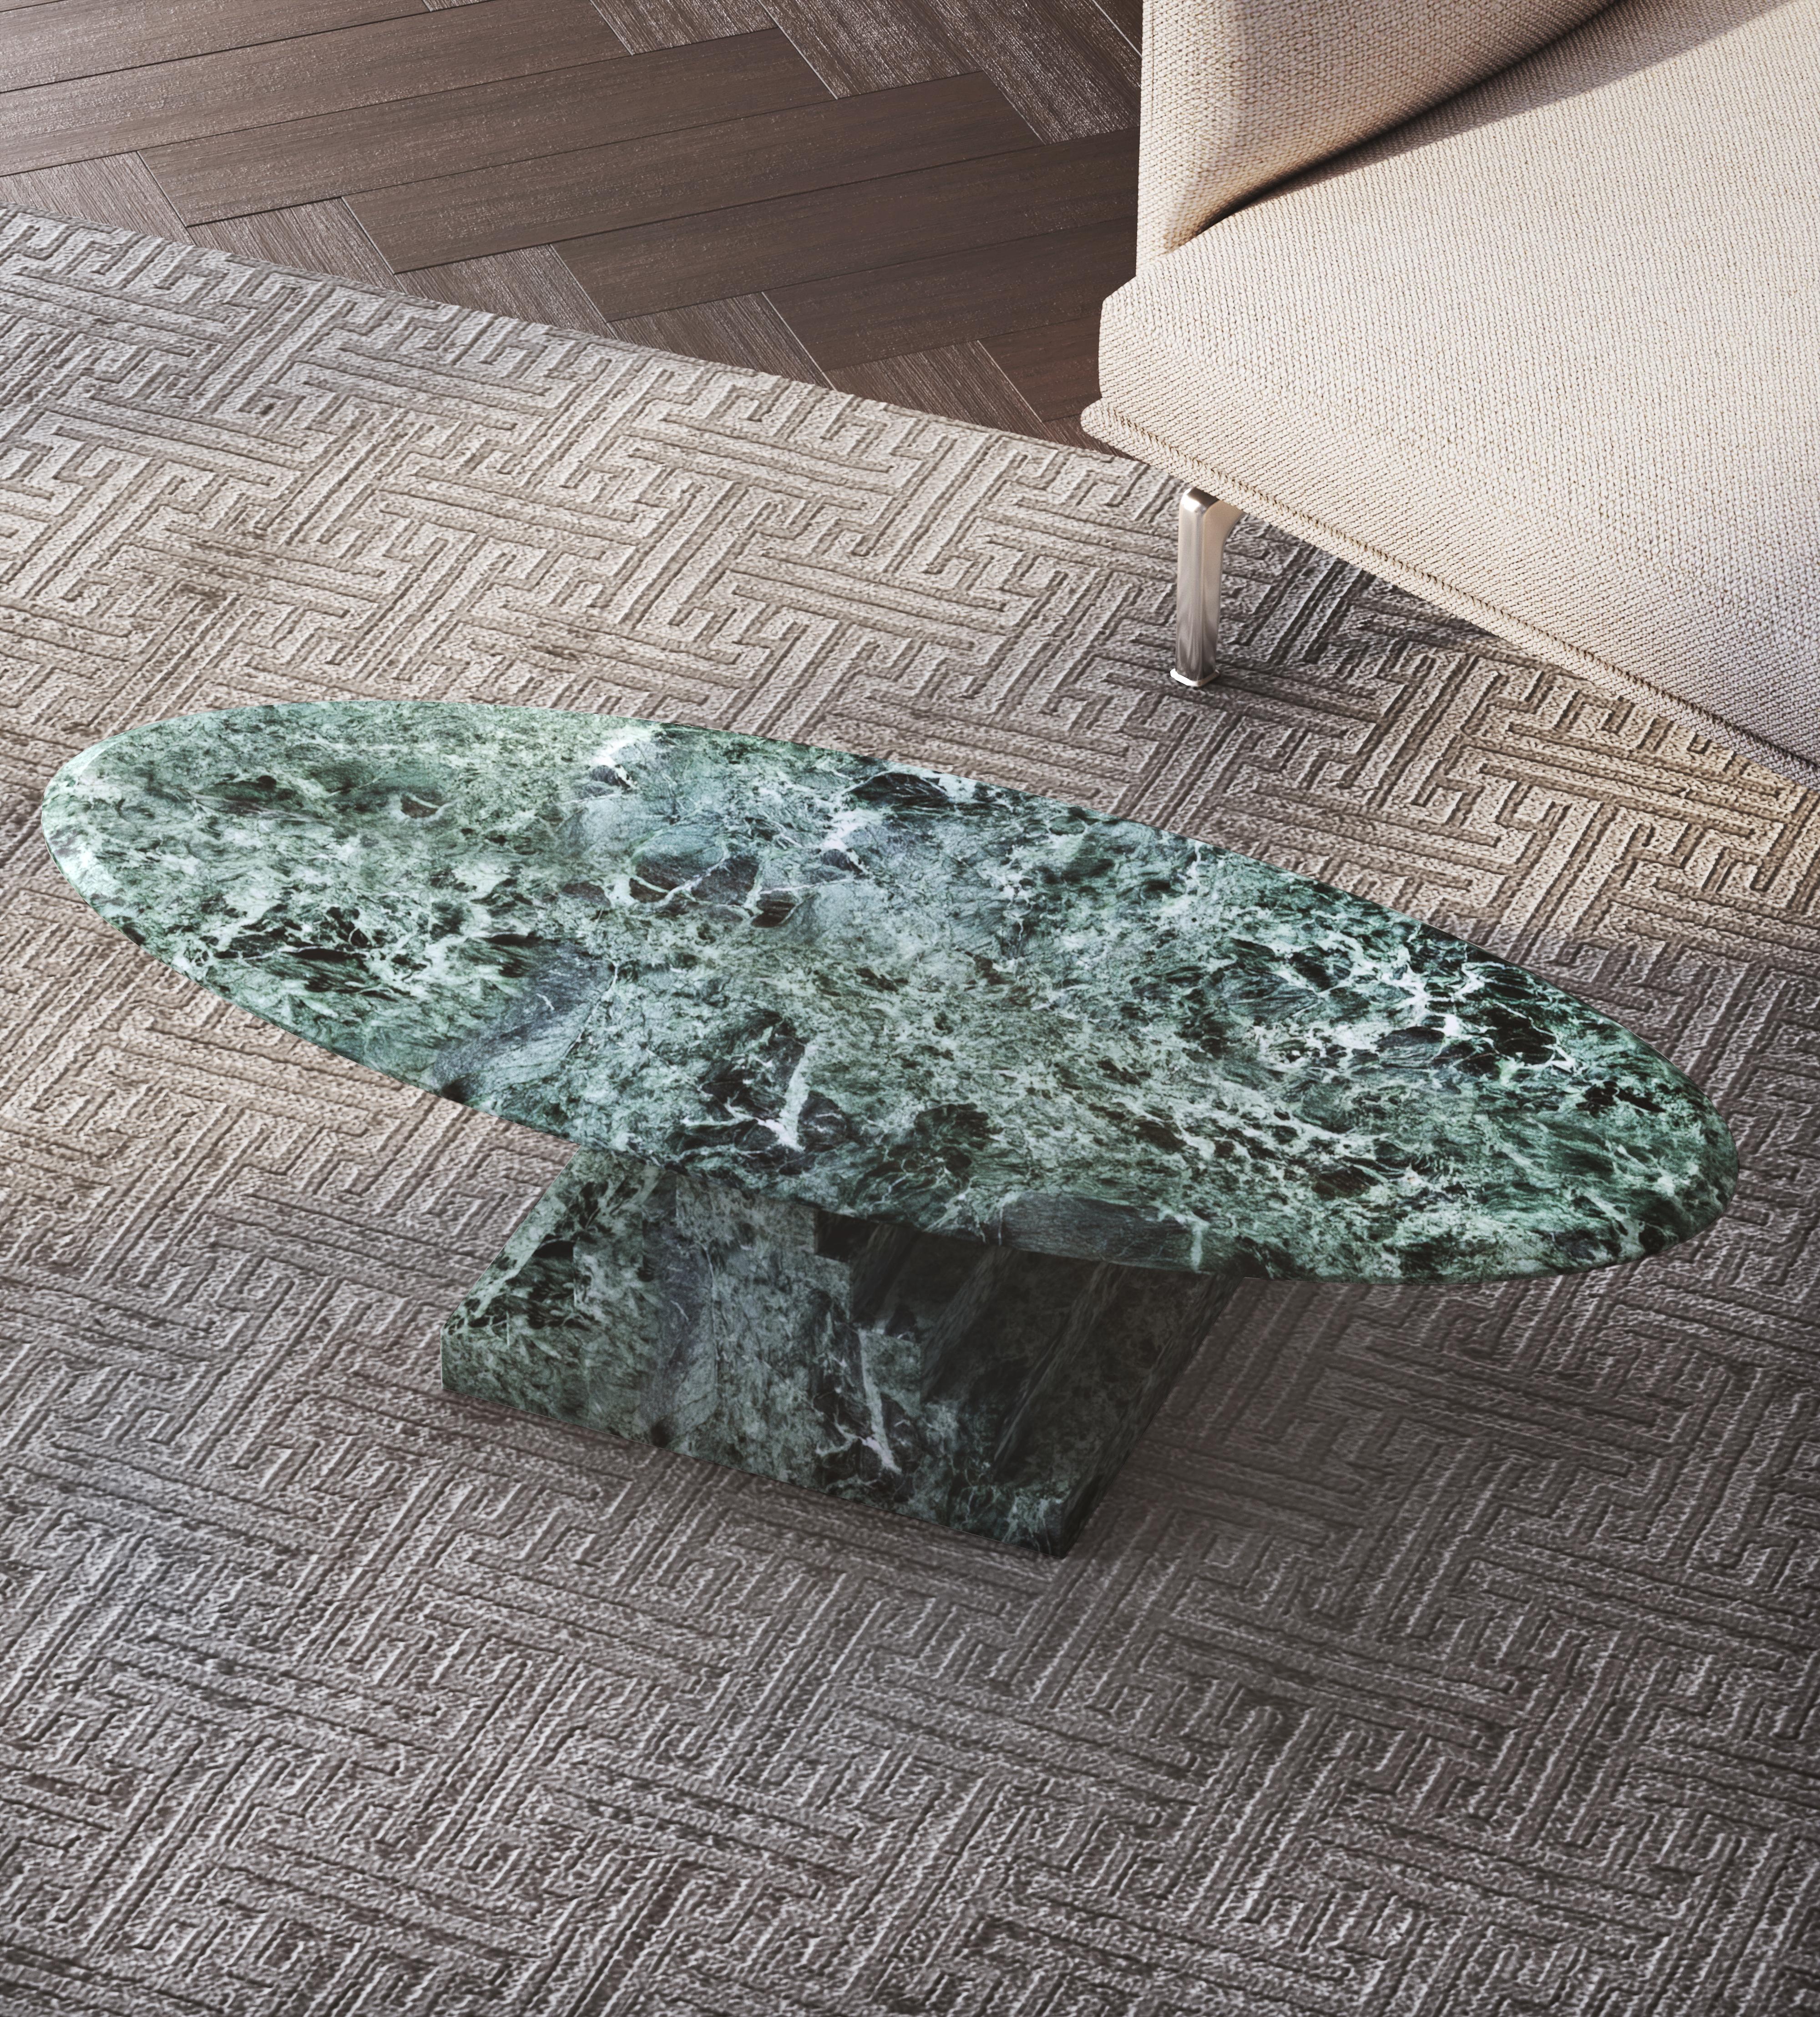 Chinese NORDST NIKO Coffee Table, Italian Green Marble, Danish Modern Design , New For Sale